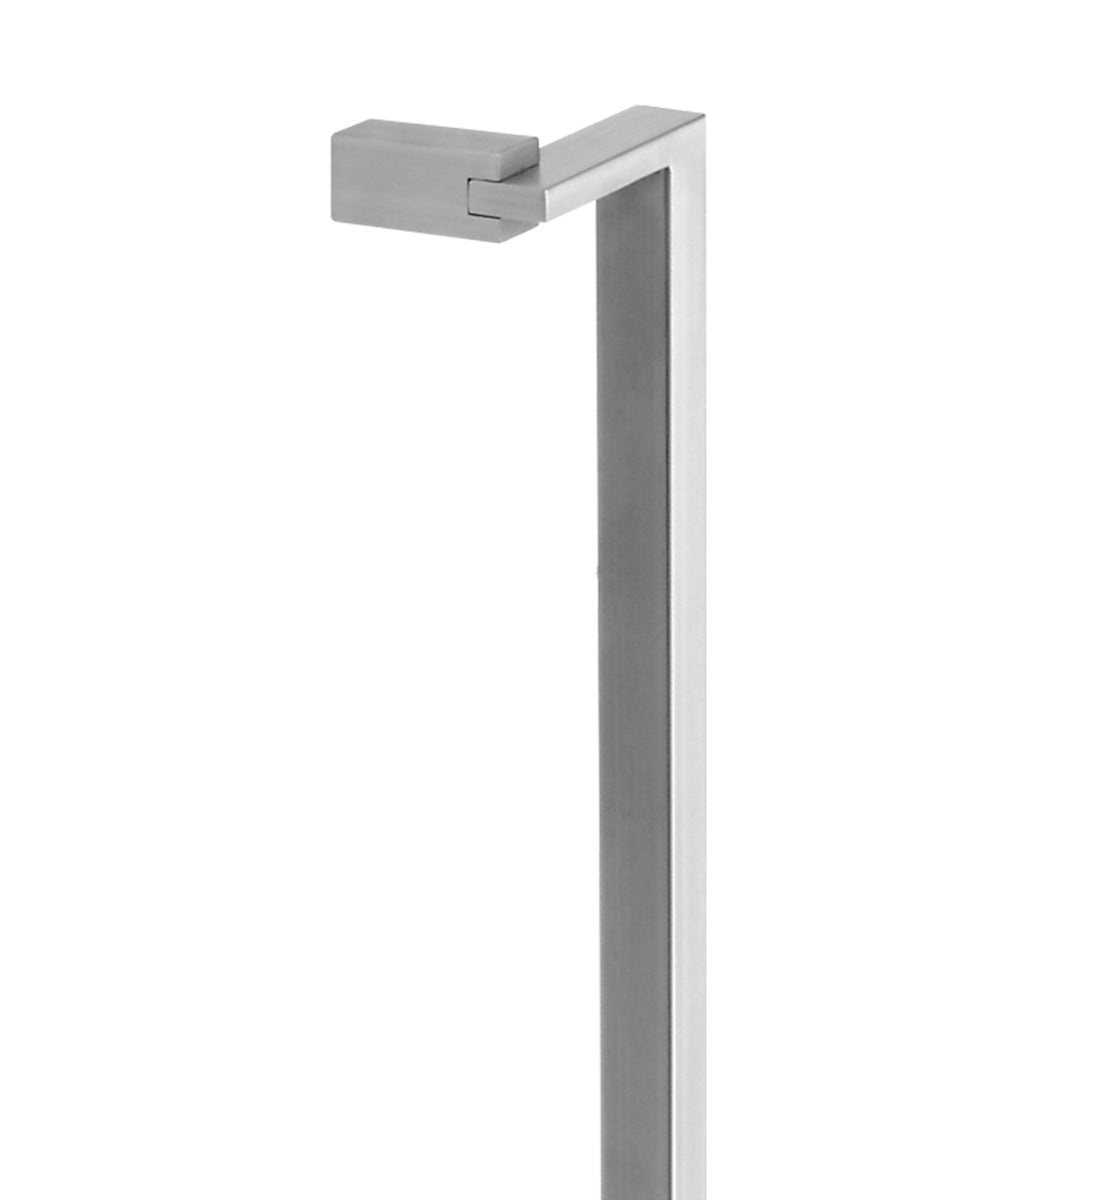 8020 Offset Single Entrance Handle, Rear Disk Fix, 825mm x 25mm, CTC 800mm in Satin Stainless